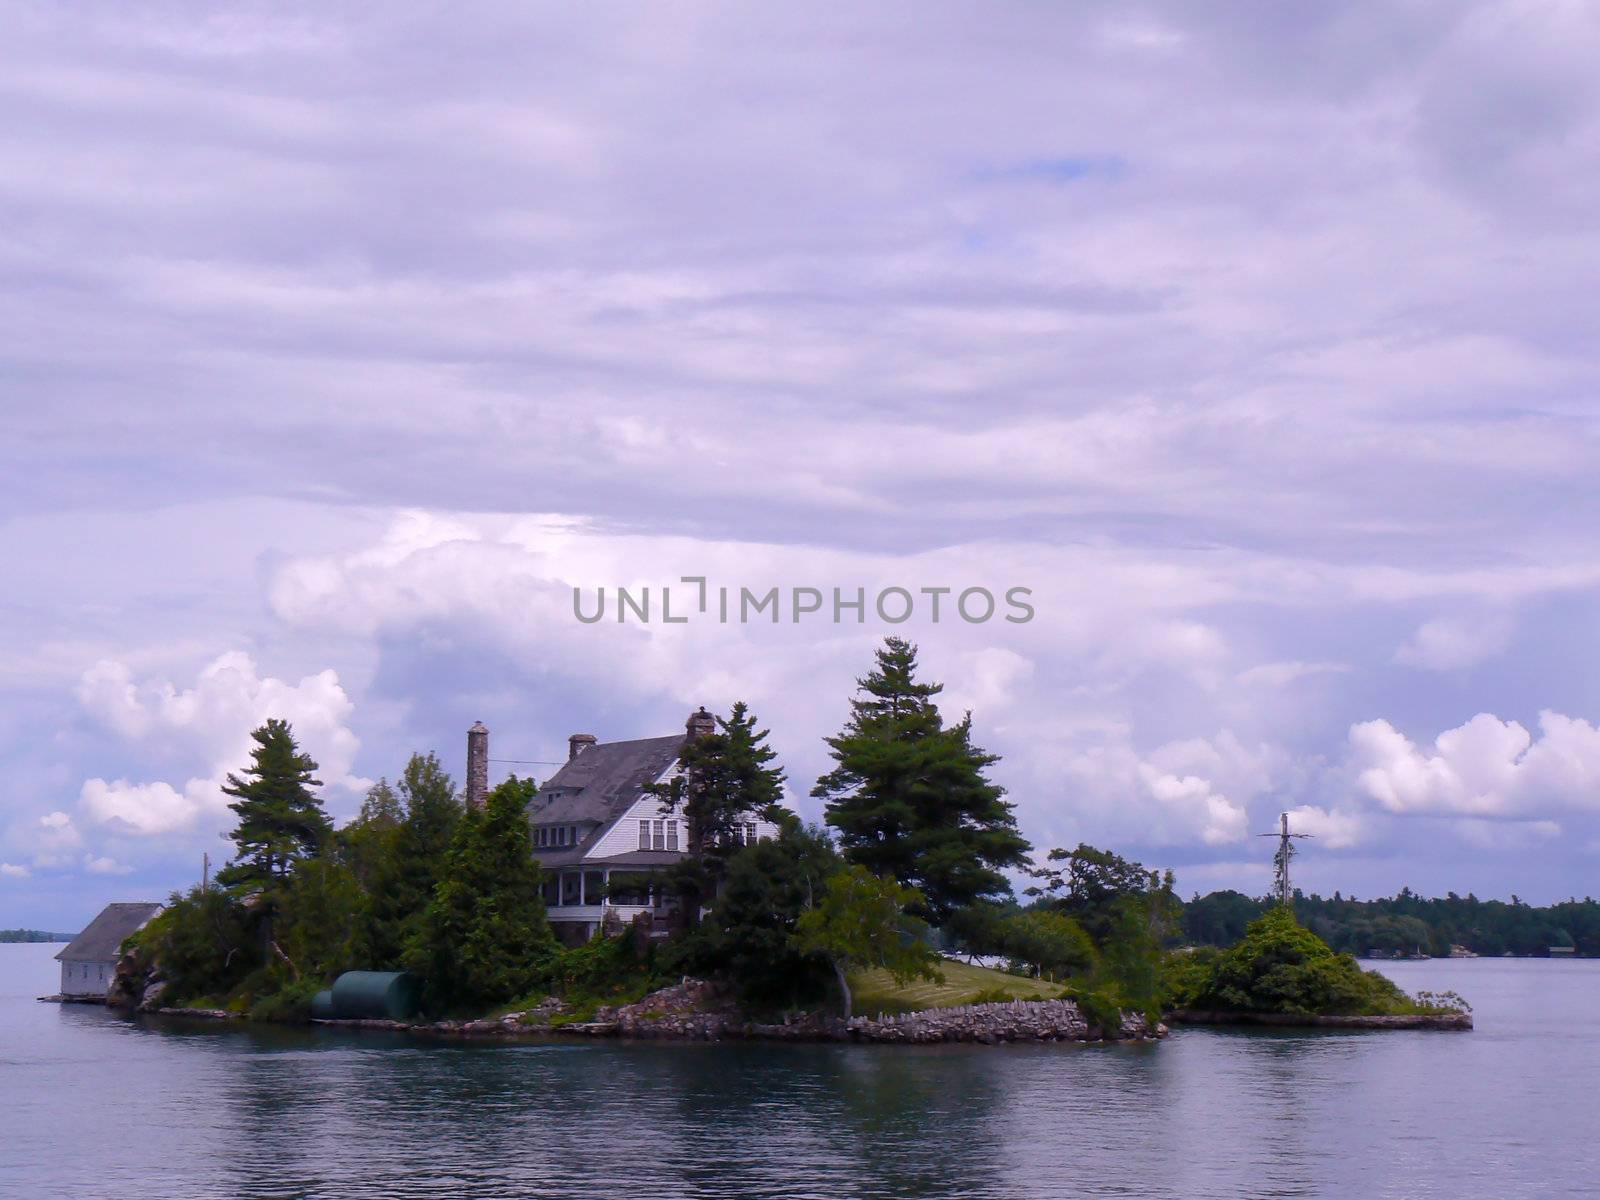 Two islands with a little bridge between and a cross on it and a house on the other between the thousand islands on the Ontario lake, Canada, by cloudy weather